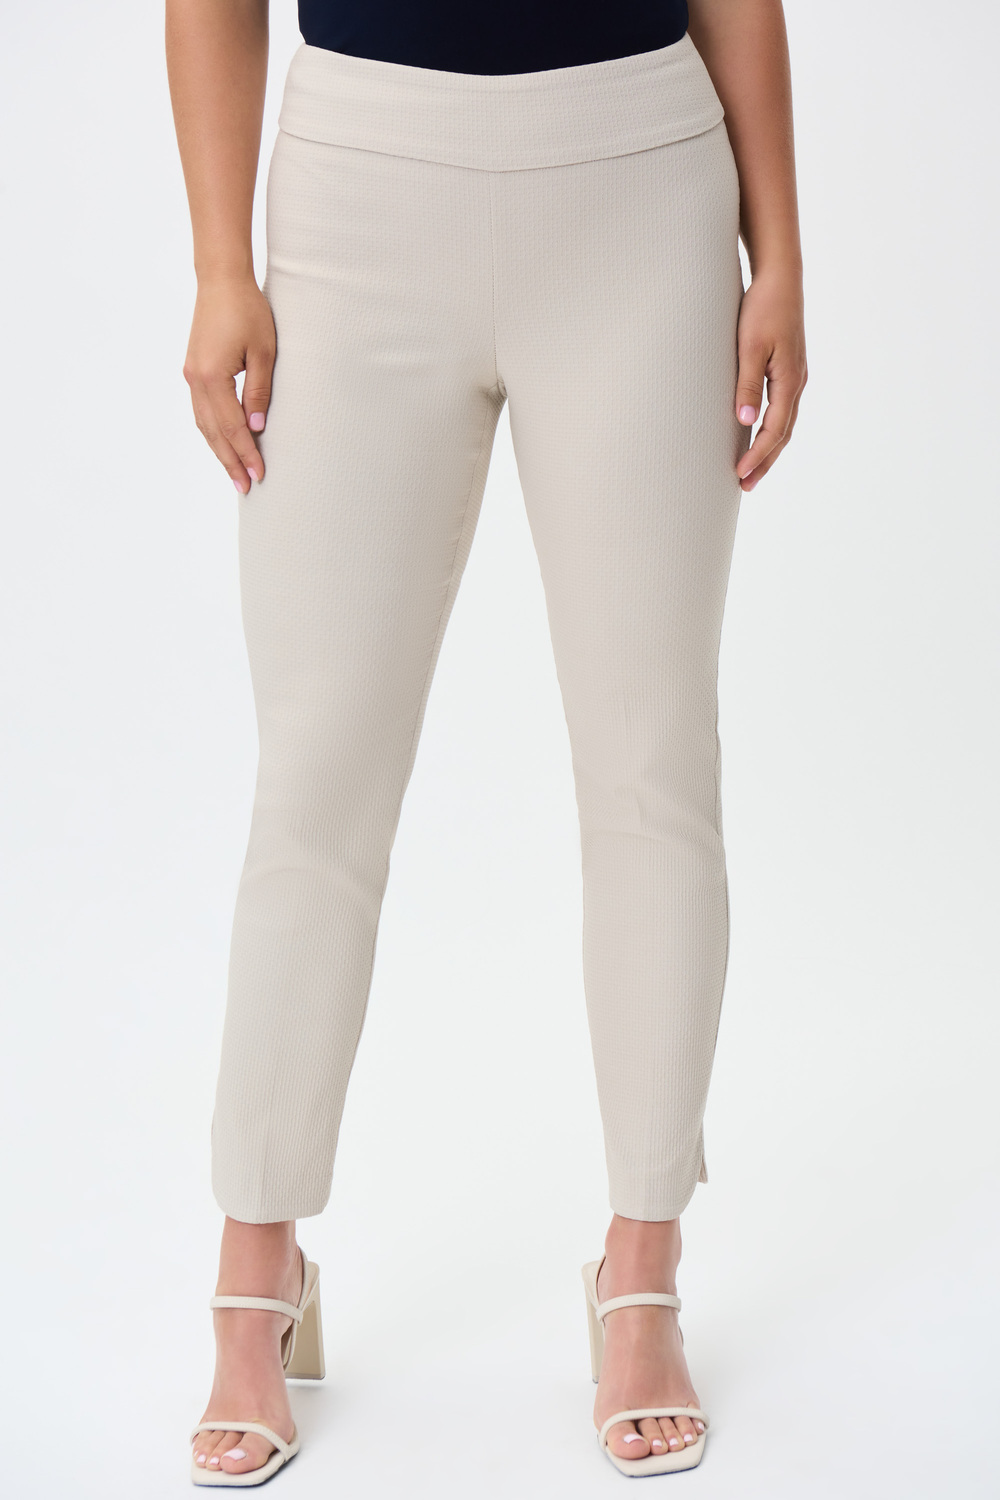 Contour Waistband Cropped Pants Style 231220. Moonstone